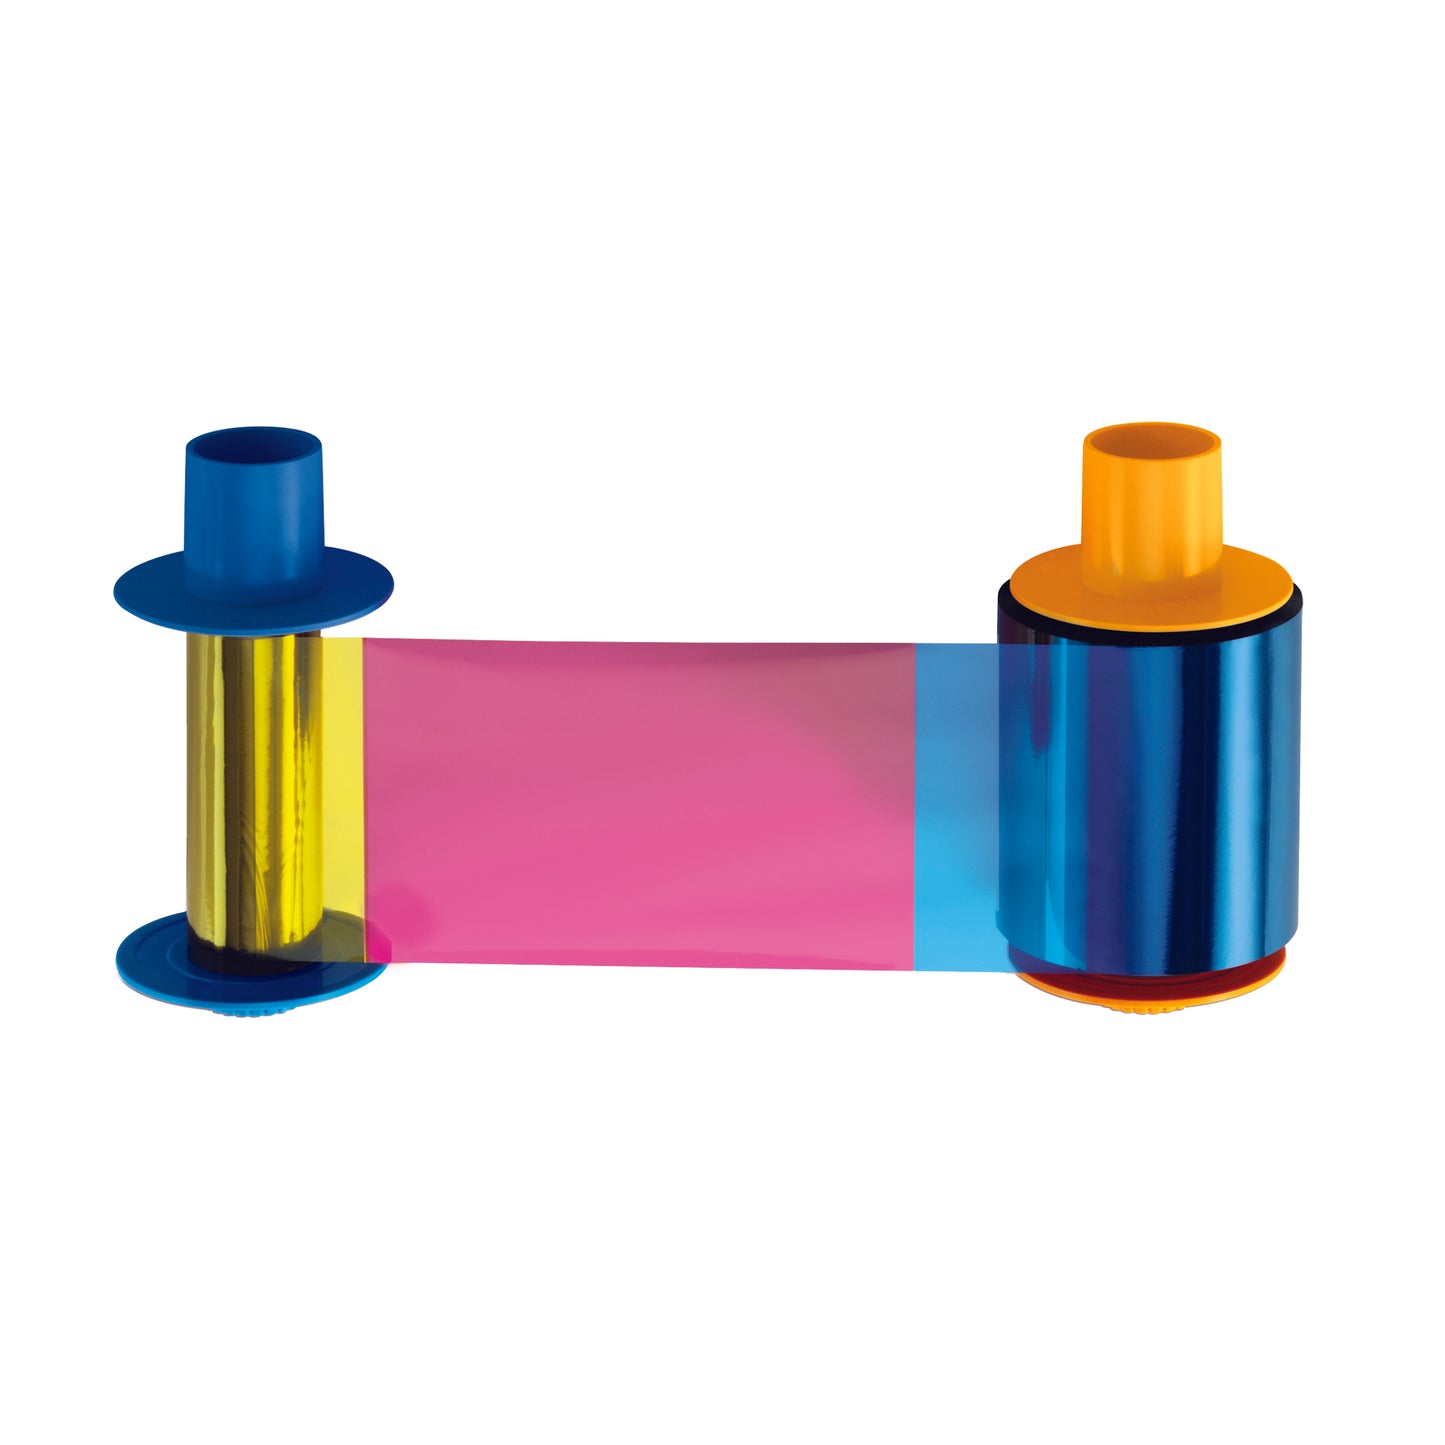 A roll of Fargo 045200 YMCKO Color Ribbon for DTC4500e & DTC4500 Printers with sections of yellow, red, and blue color strip secured between two plastic spools, perfect for use with ID Card Printers like the DTC4500e.